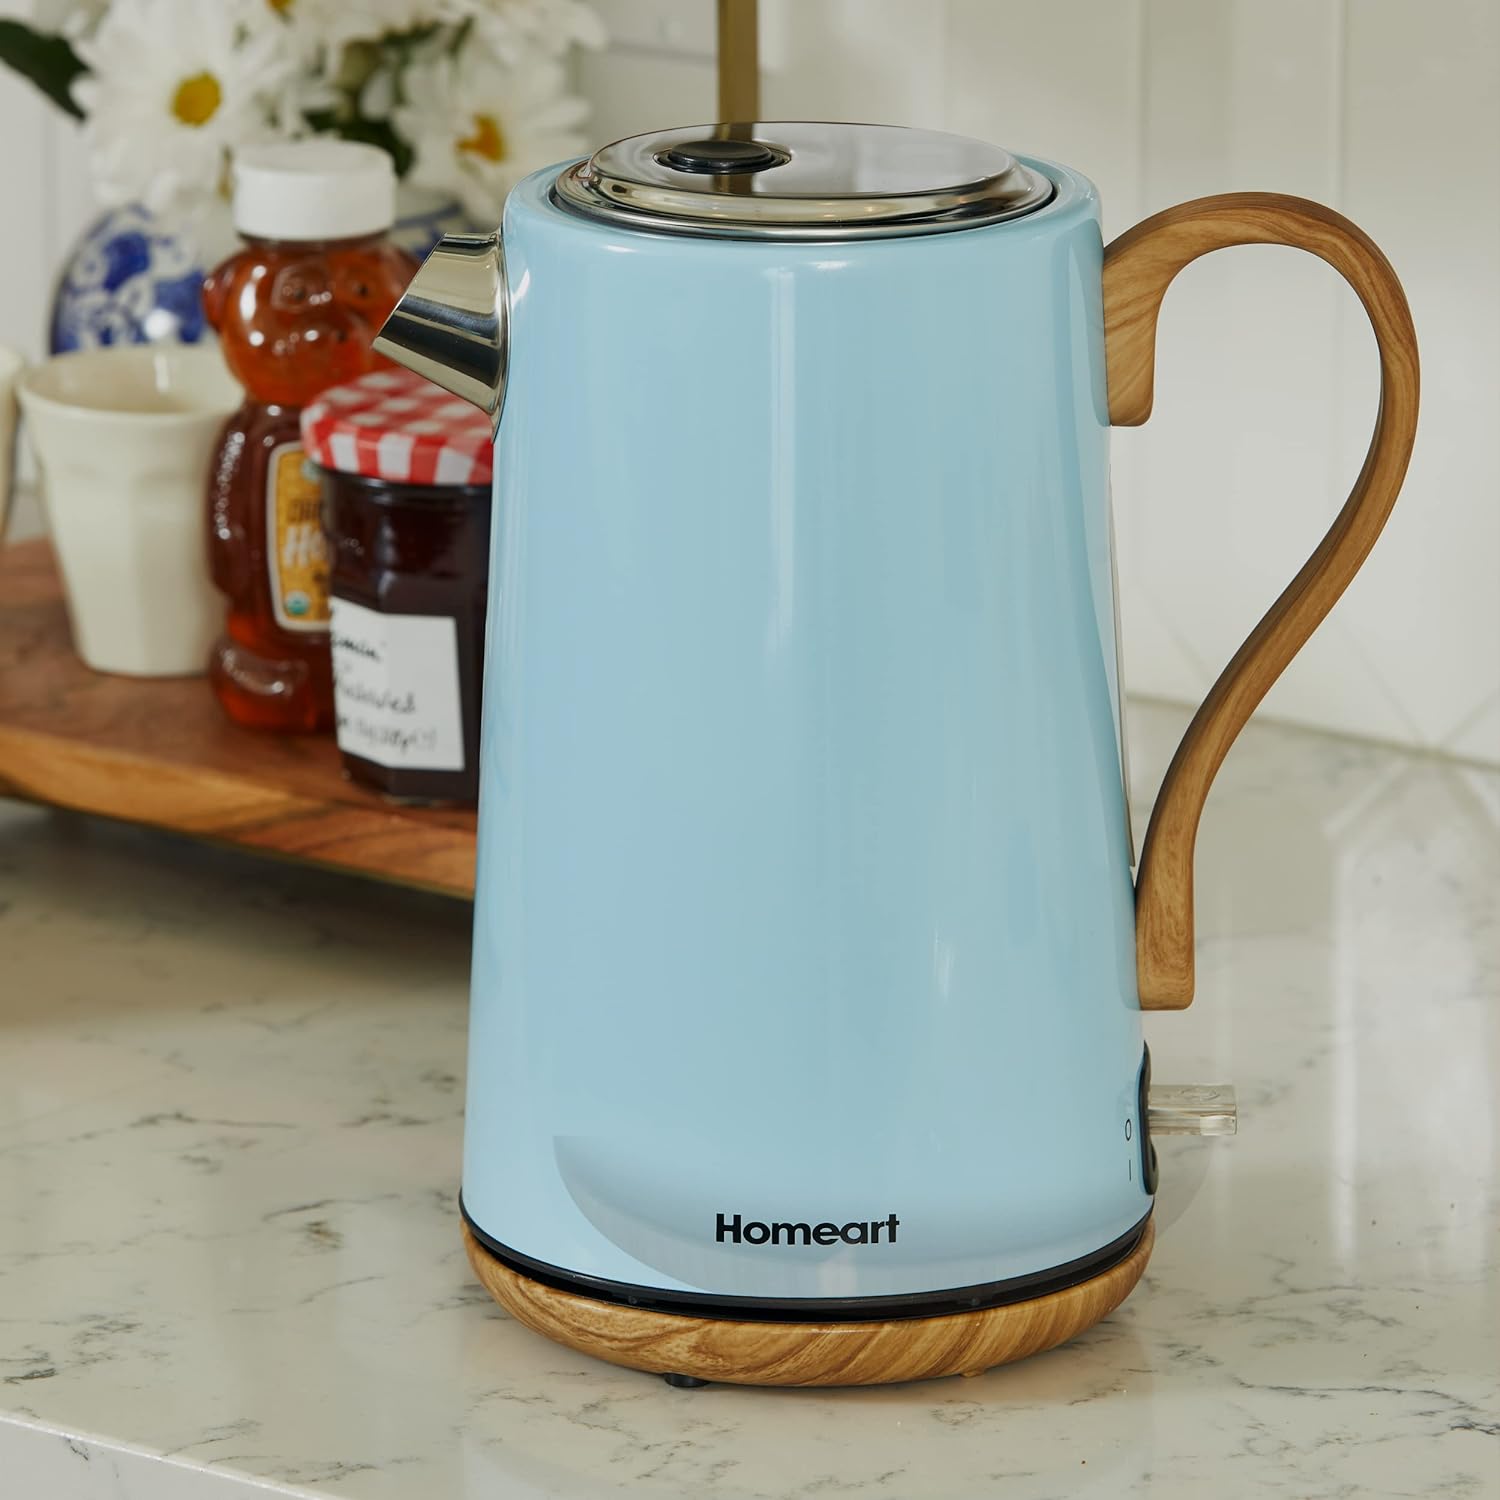 Homeart Panda Cordless Electric Kettle with Wood Detail - Stainless Steel With Removable Filter, Fast Boiling and Auto Shut-off - 1.7L Capacity, Powder Blue